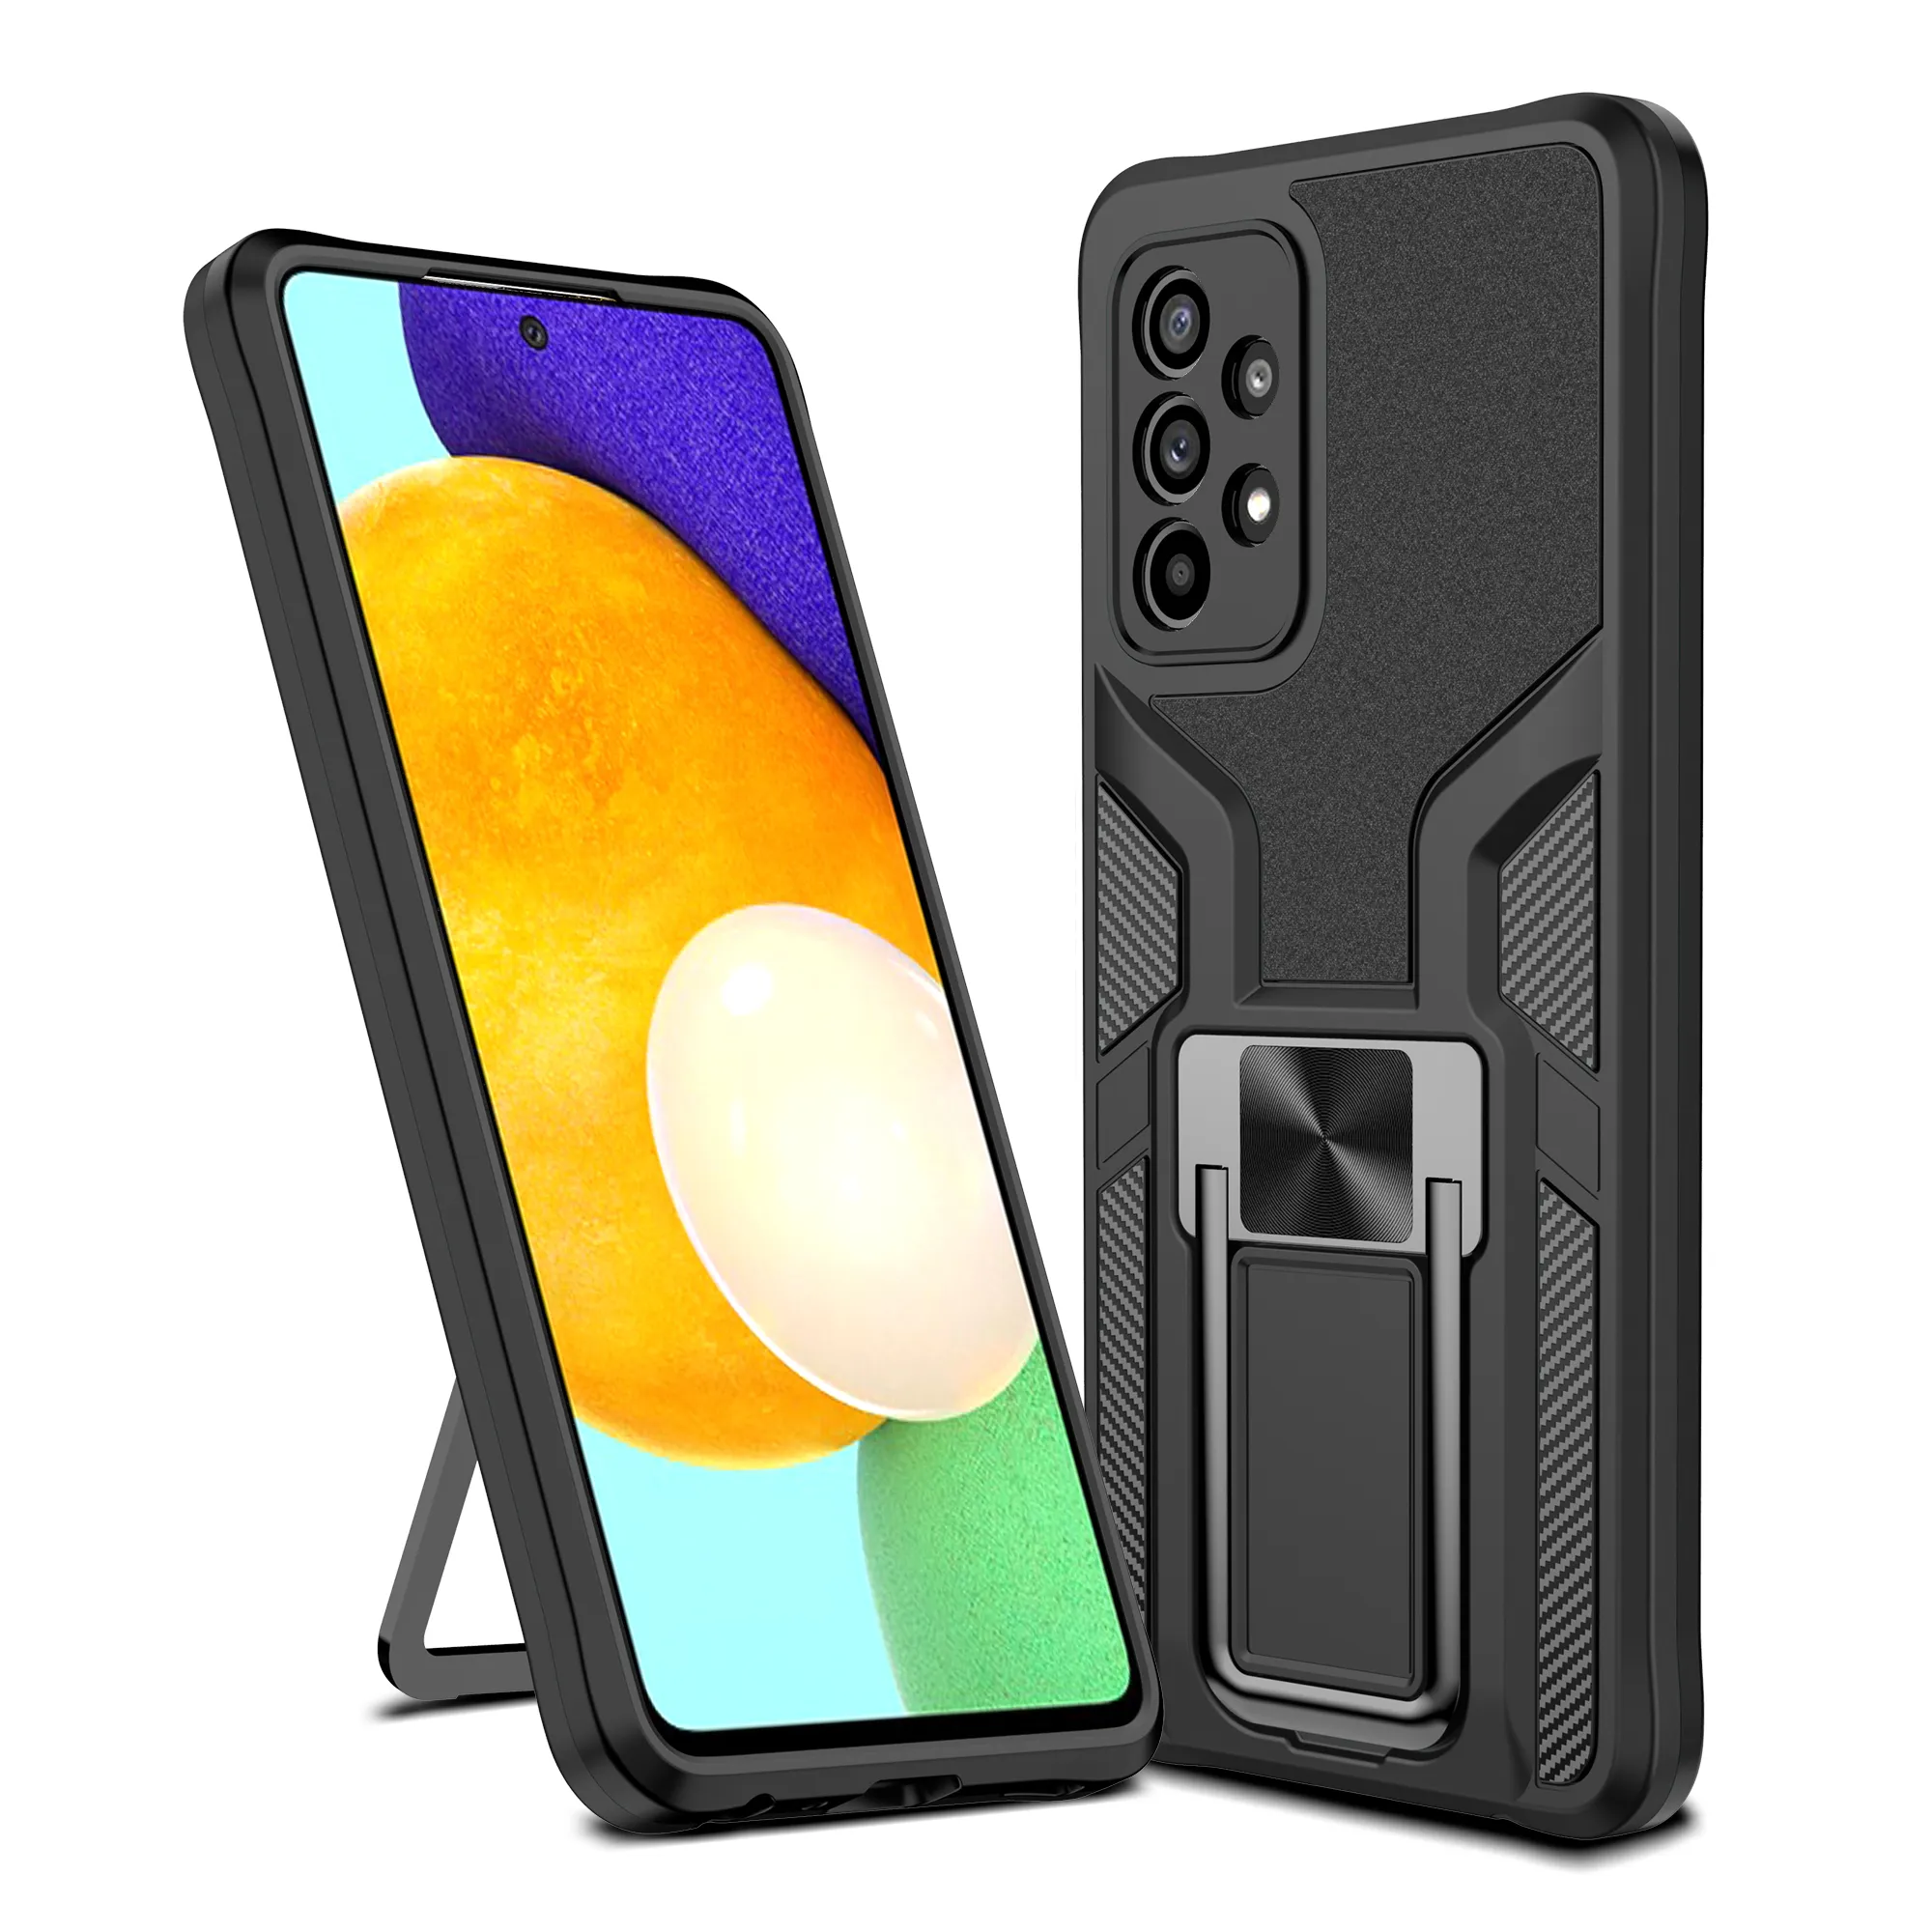 Rugged Magnetic Ring Stand Armor Shockproof Cases For Samsung Galaxy A52 A72 A32 5G Hard PC Bumper Soft Silicone Back Cover